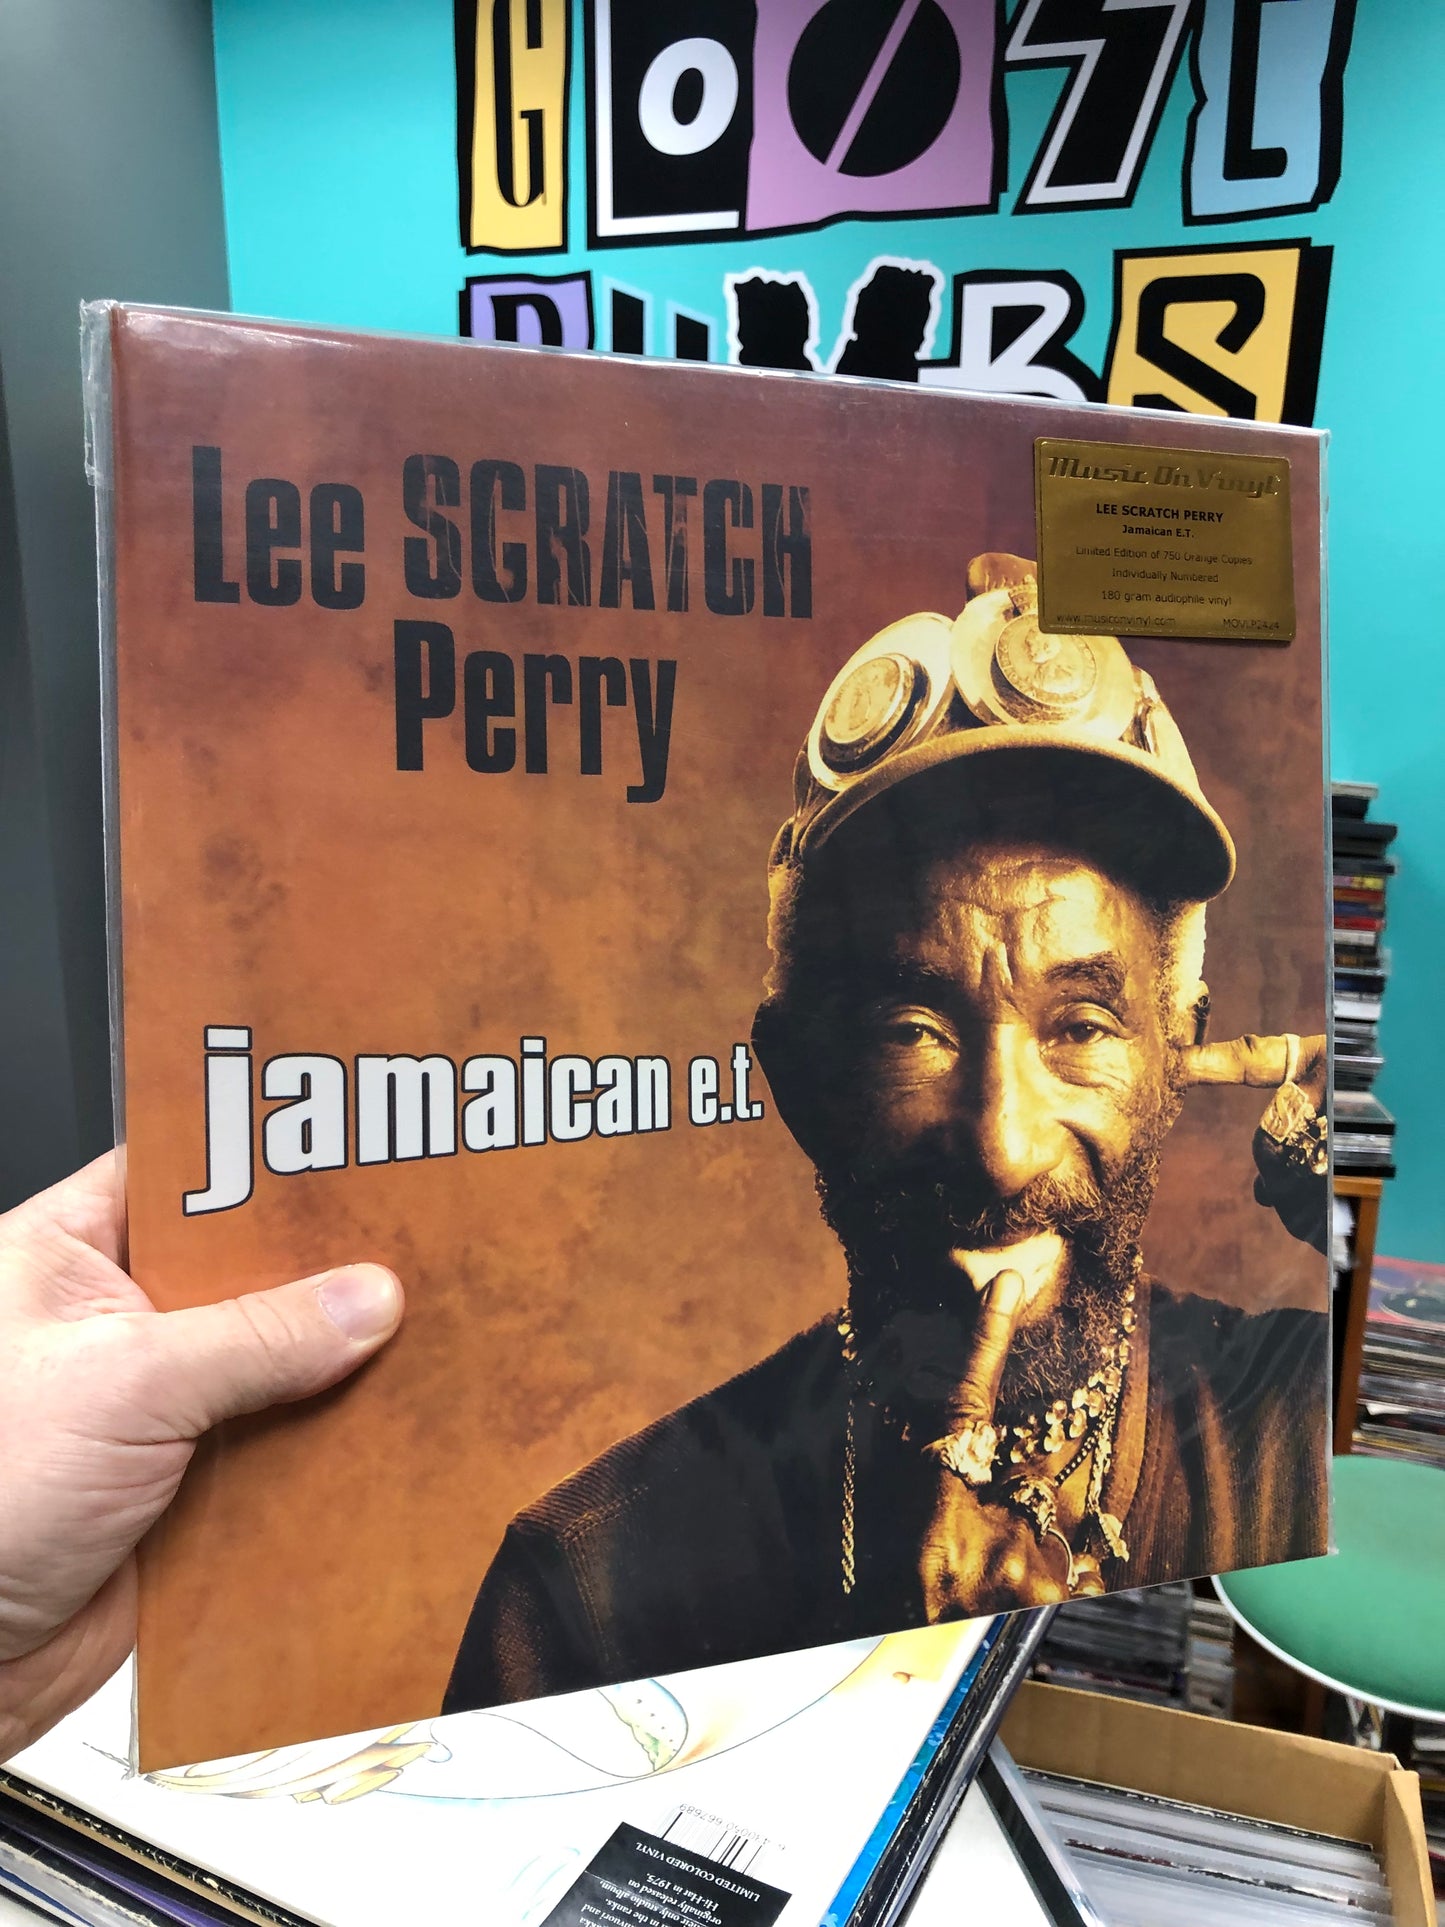 Lee Scratch Perry: Jamaican E.T., reissue, Europe 2019